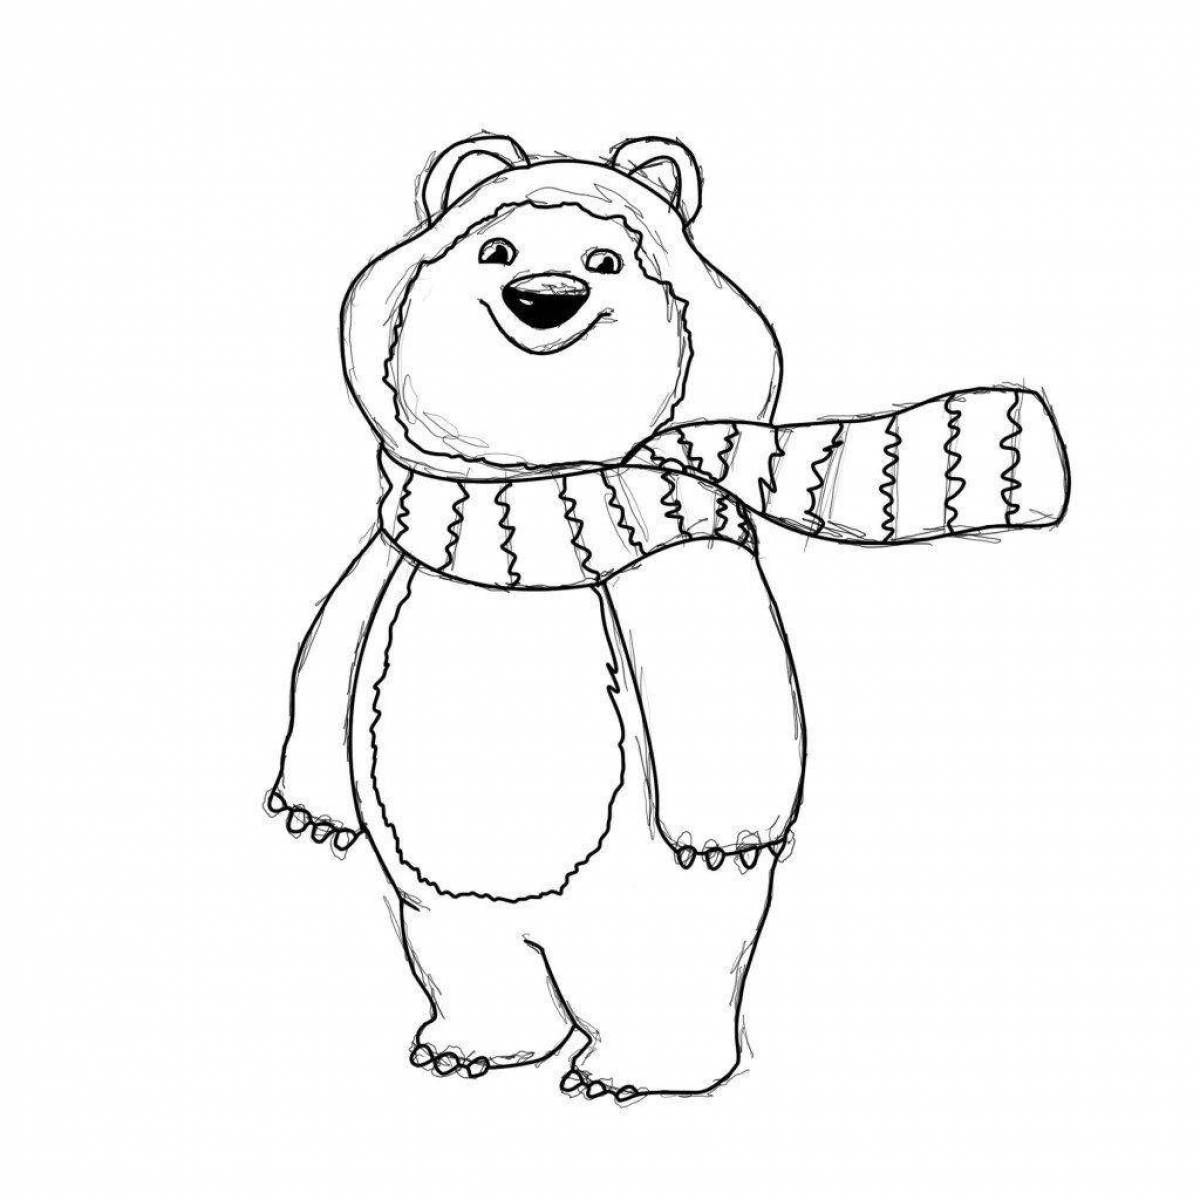 Glittering olympic bear coloring page